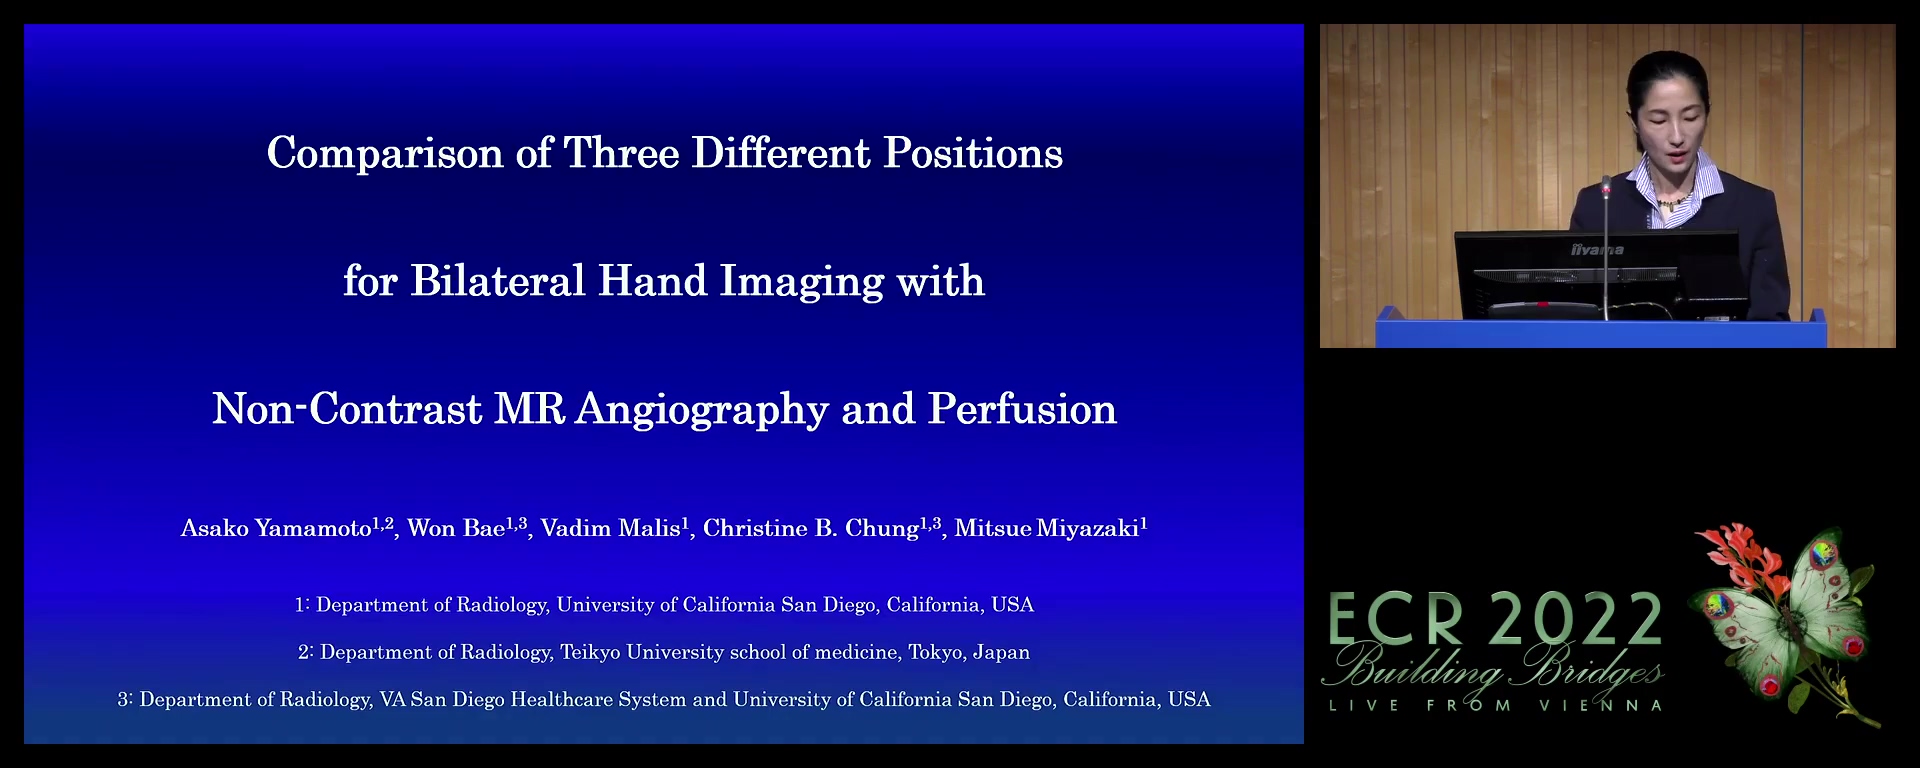 Comparison of three different positions for bilateral hands non-contrast MR angiography and perfusion - Asako Yamamoto, Tokyo / JP